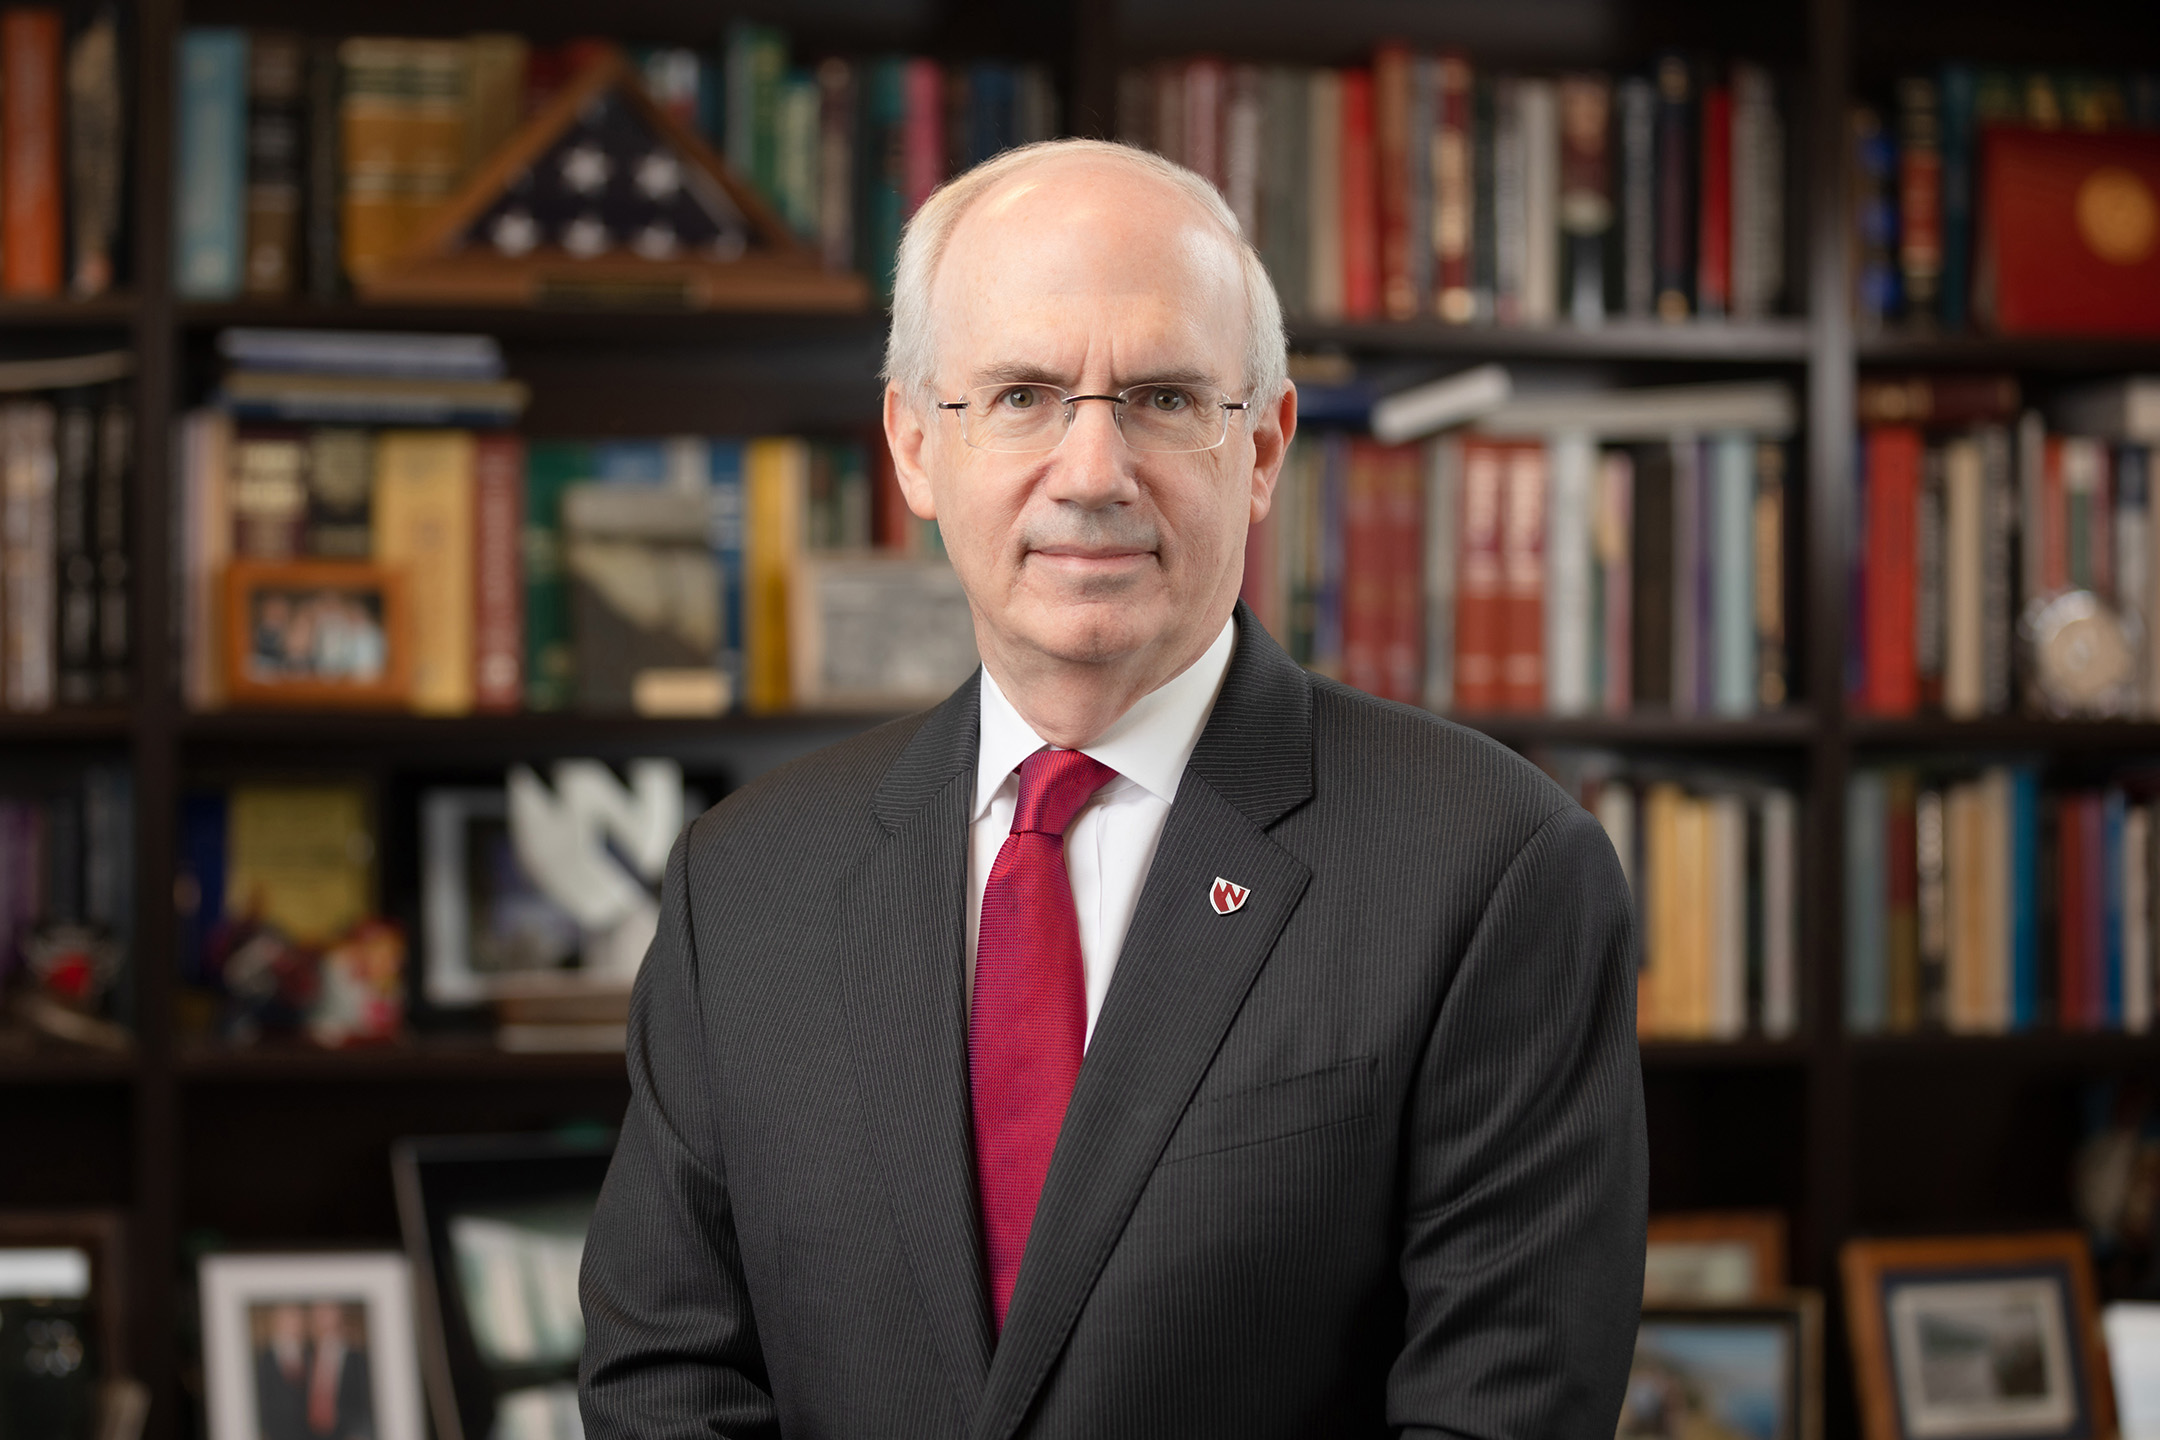 Public forums today for NU president priority candidate Jeffrey P. Gold, MD